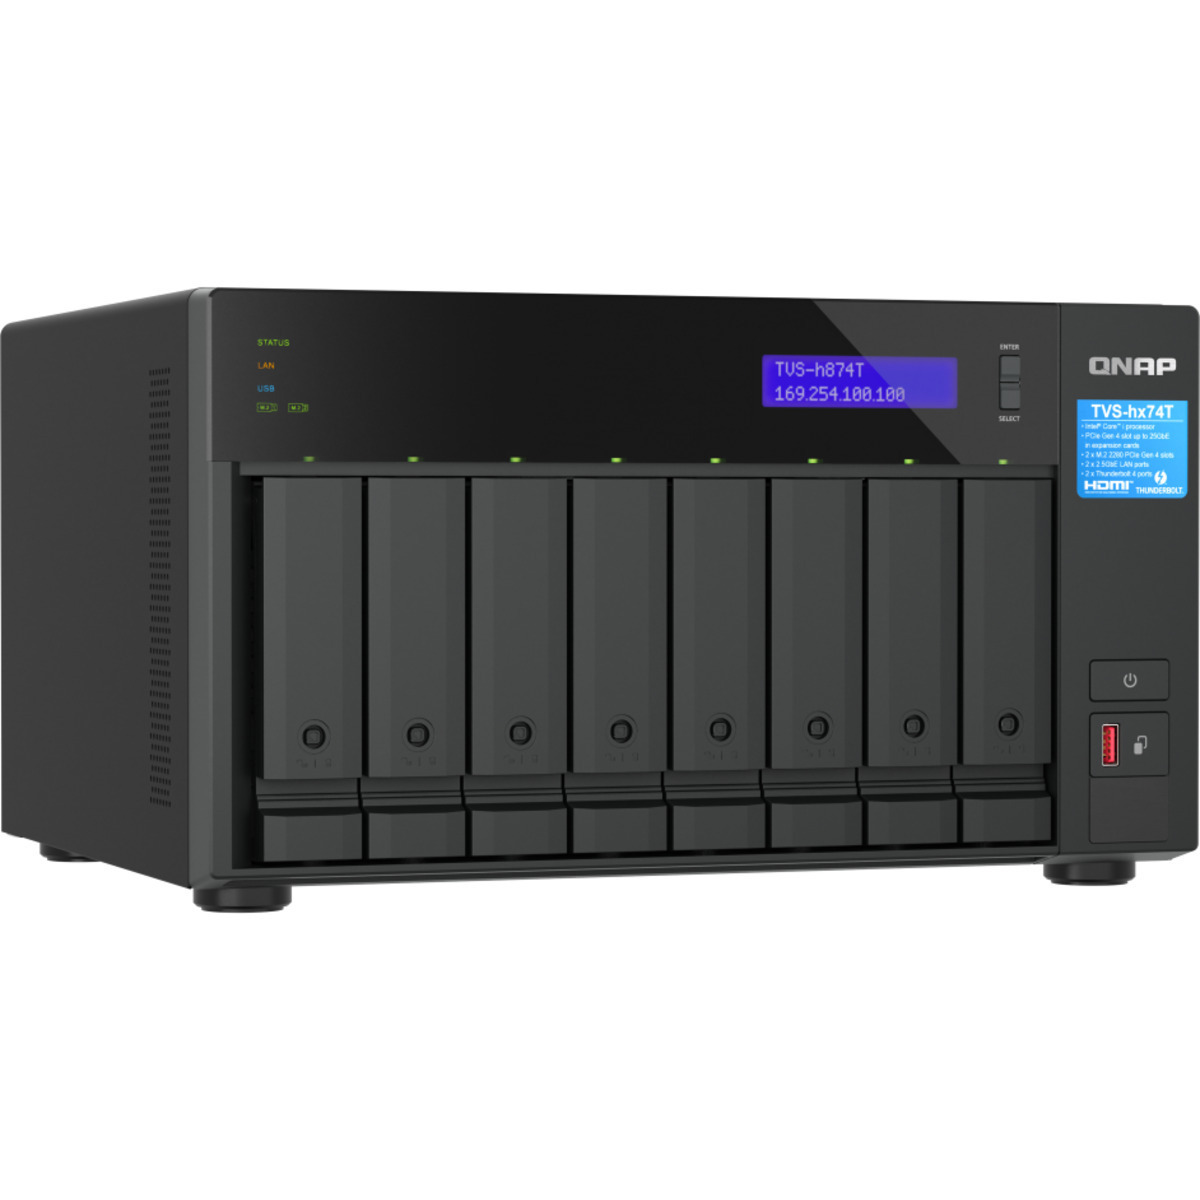 QNAP TVS-h874T Core i9 Thunderbolt 4 98tb 8-Bay Desktop Multimedia / Power User / Business DAS-NAS - Combo Direct + Network Storage Device 7x14tb Western Digital Ultrastar DC HC530 WUH721414ALE6L4 3.5 7200rpm SATA 6Gb/s HDD ENTERPRISE Class Drives Installed - Burn-In Tested TVS-h874T Core i9 Thunderbolt 4